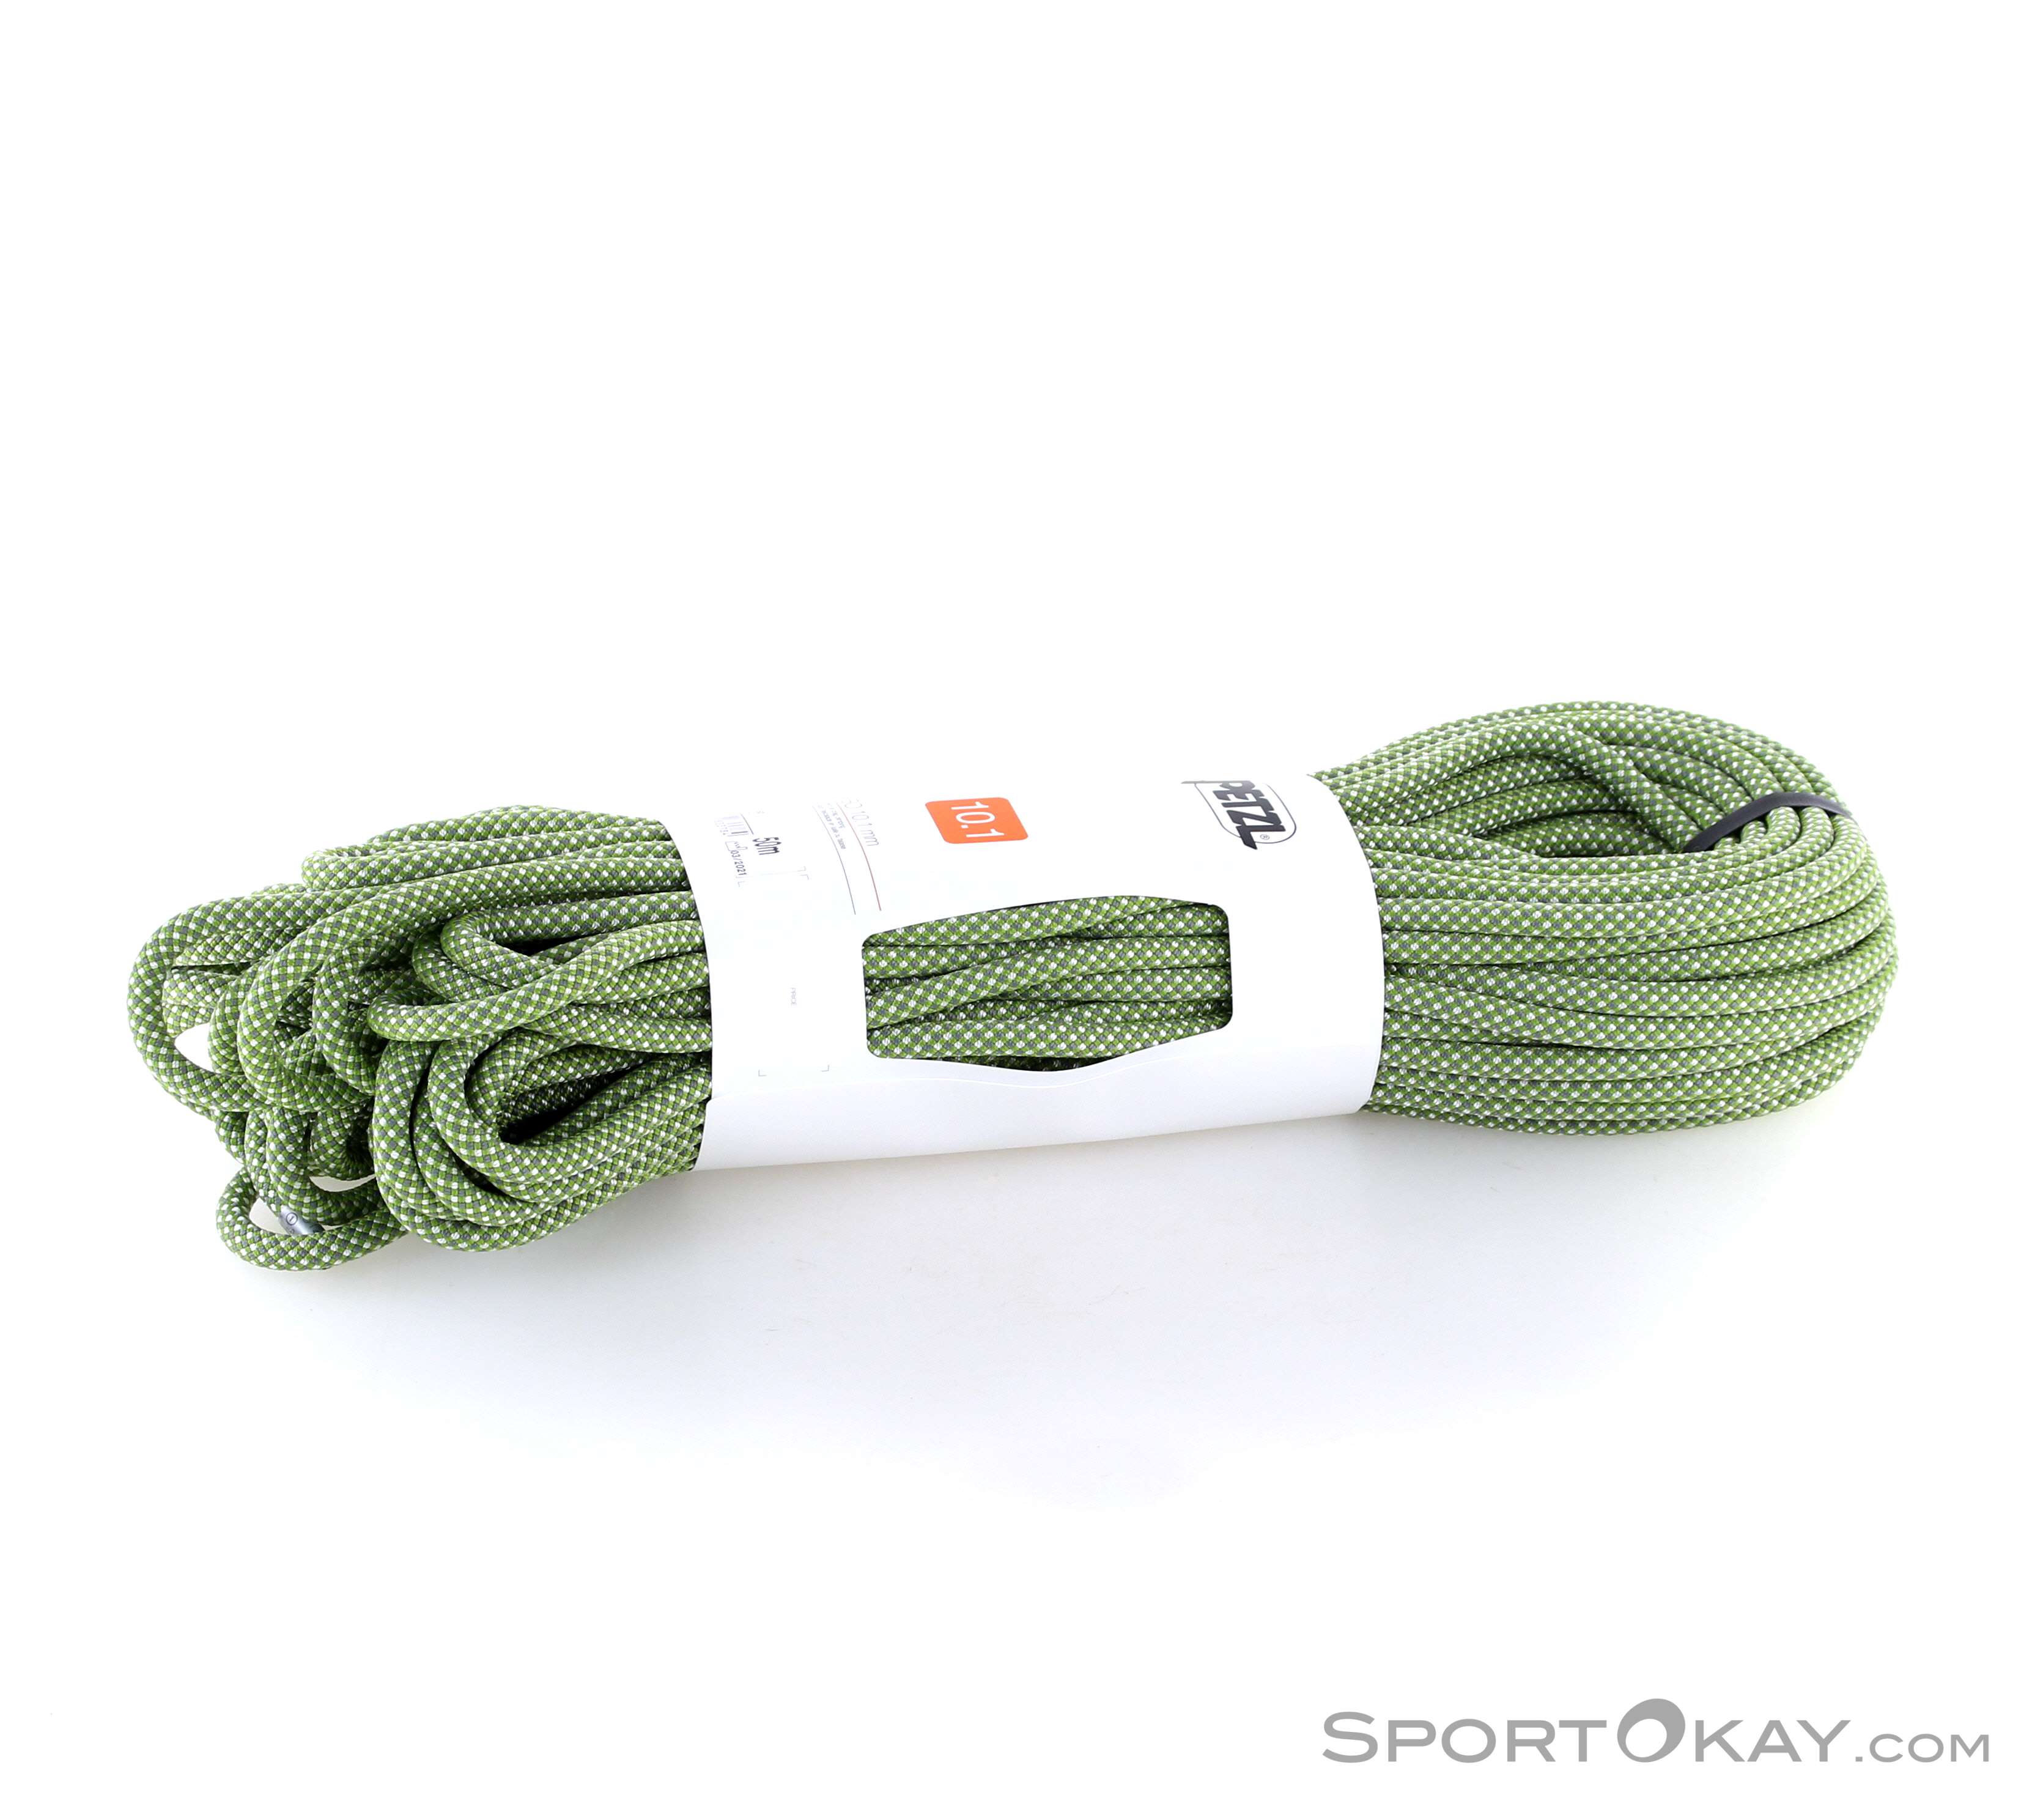 Petzl, Mambo, 10.1 Mm Diameter Single Rope For Gym Or Rock Climbing, Green,  50 M イベント、販促用 | east-wind.jp